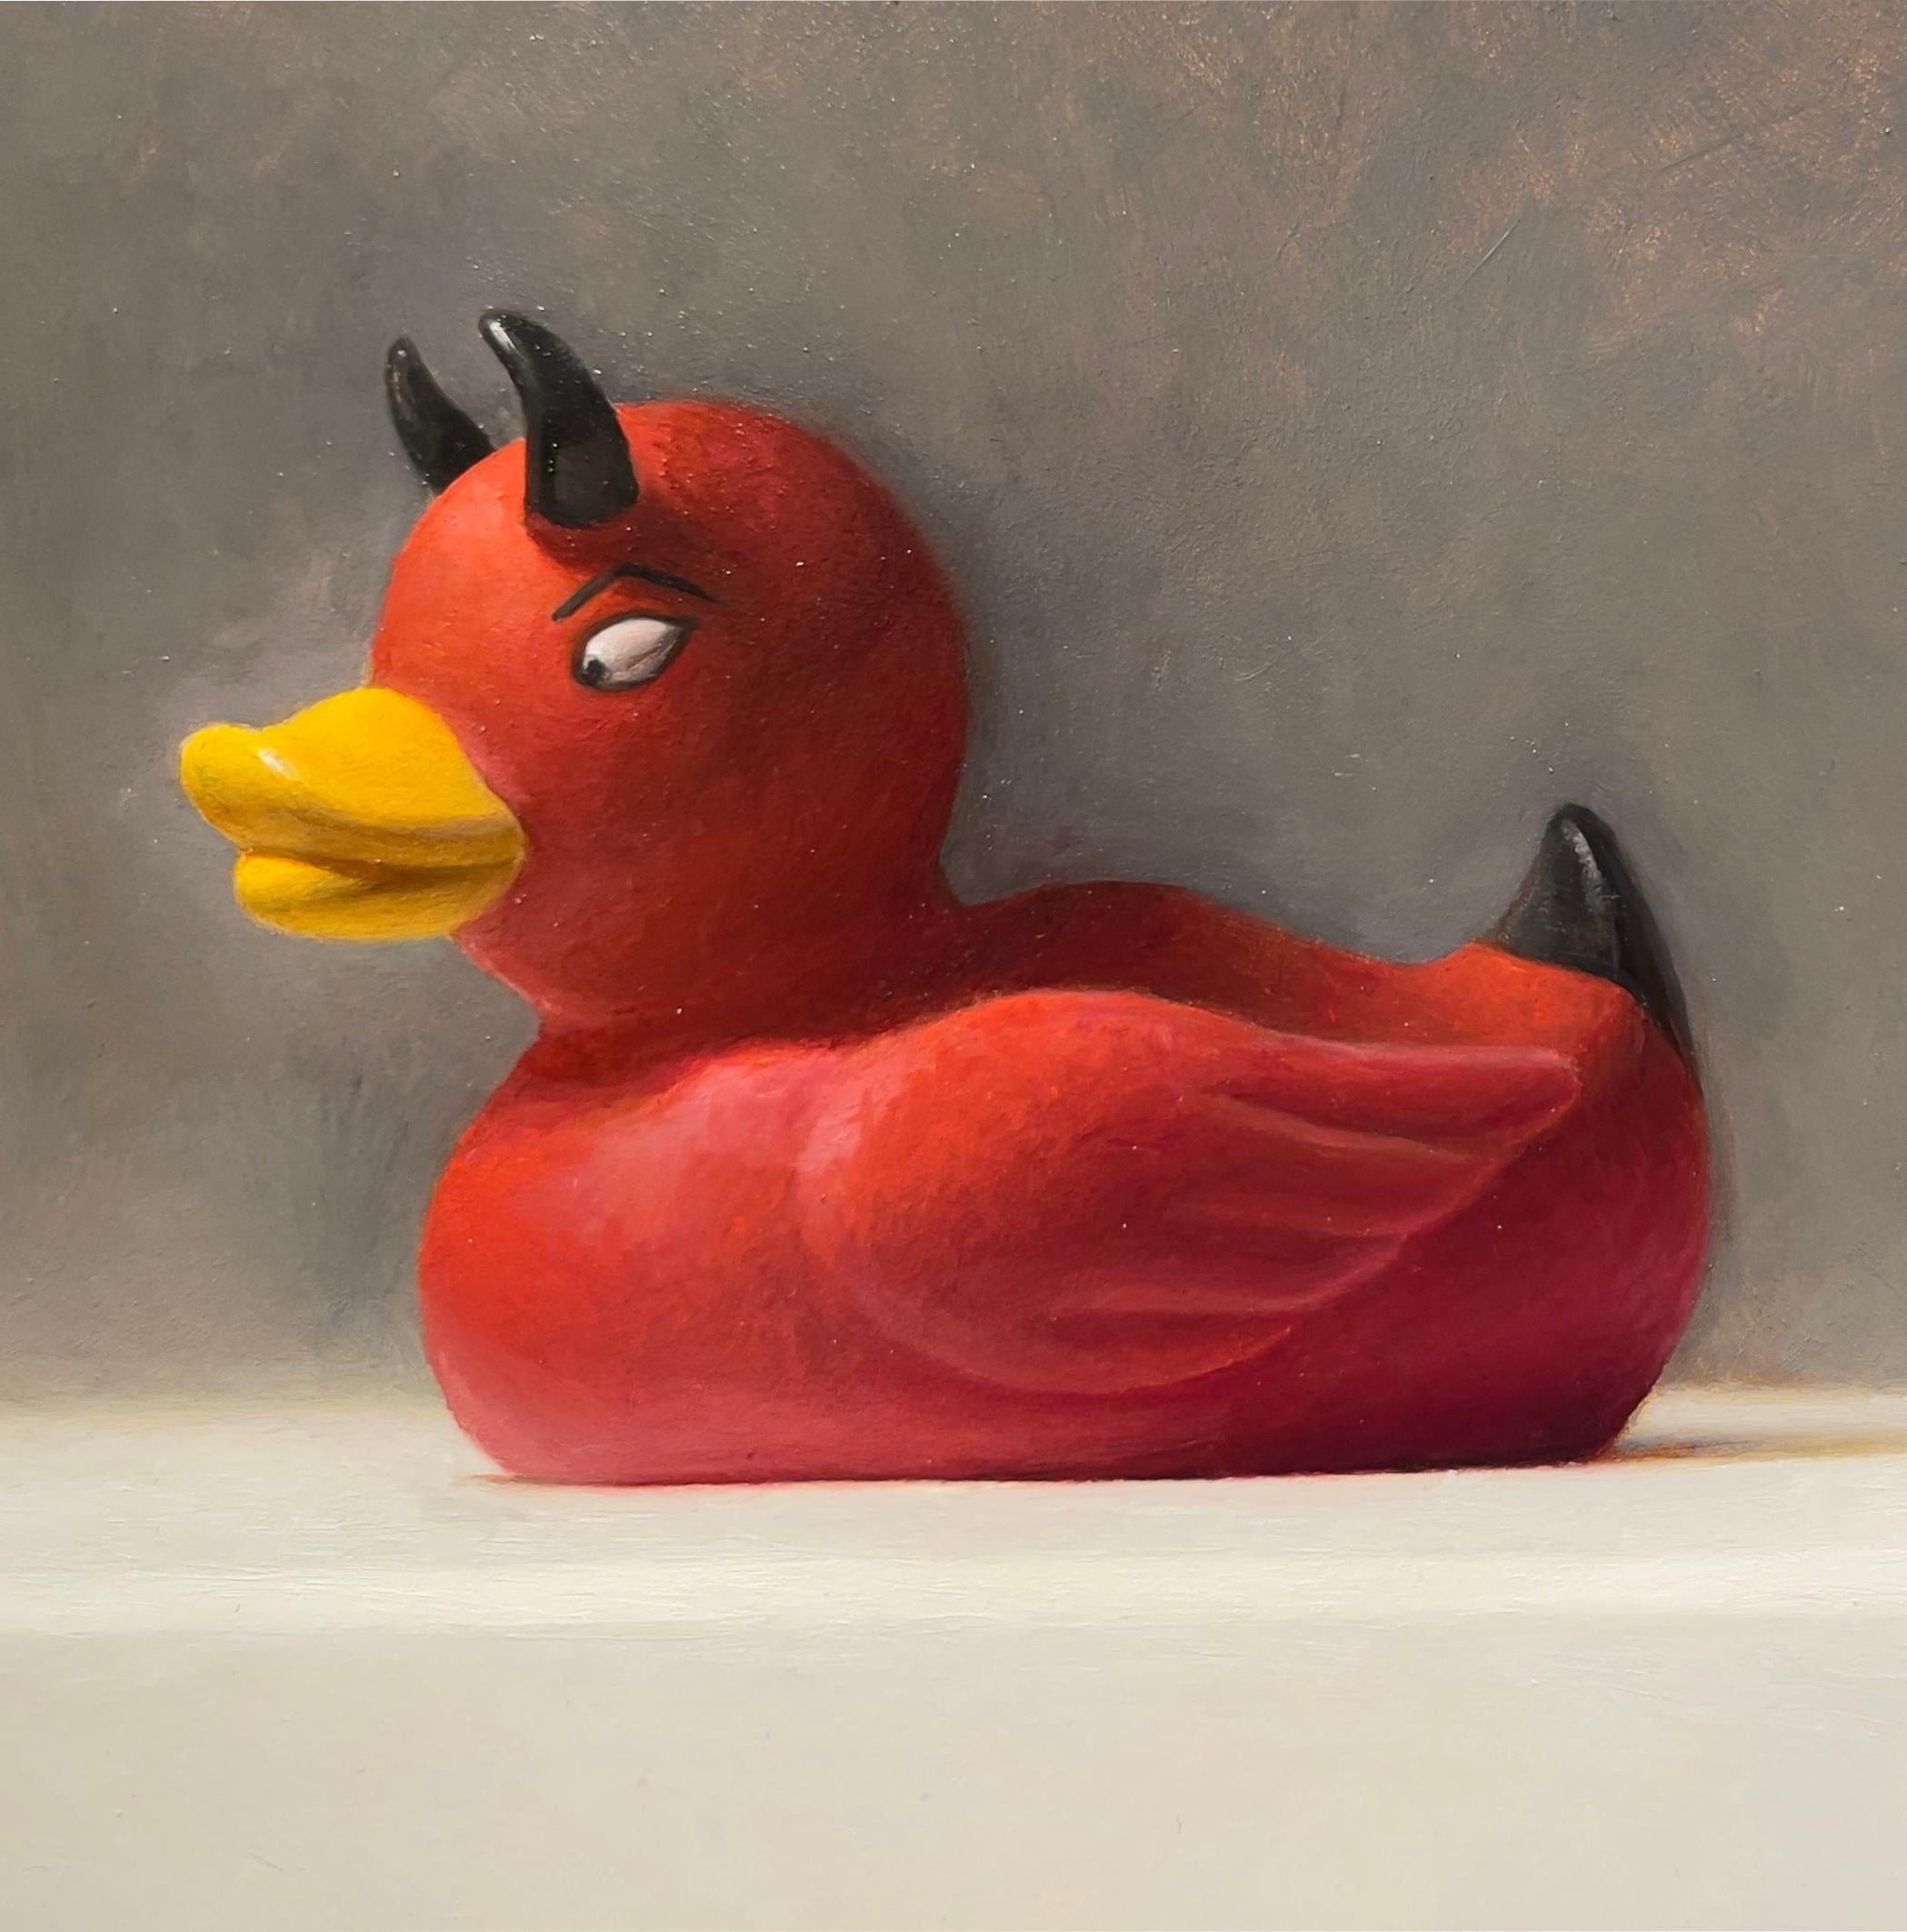 IMPOSTERS #24 (Devil Duck and Habanero Peppers) - Humorous Still Life / Realism  - Contemporary Painting by Samuel Hung